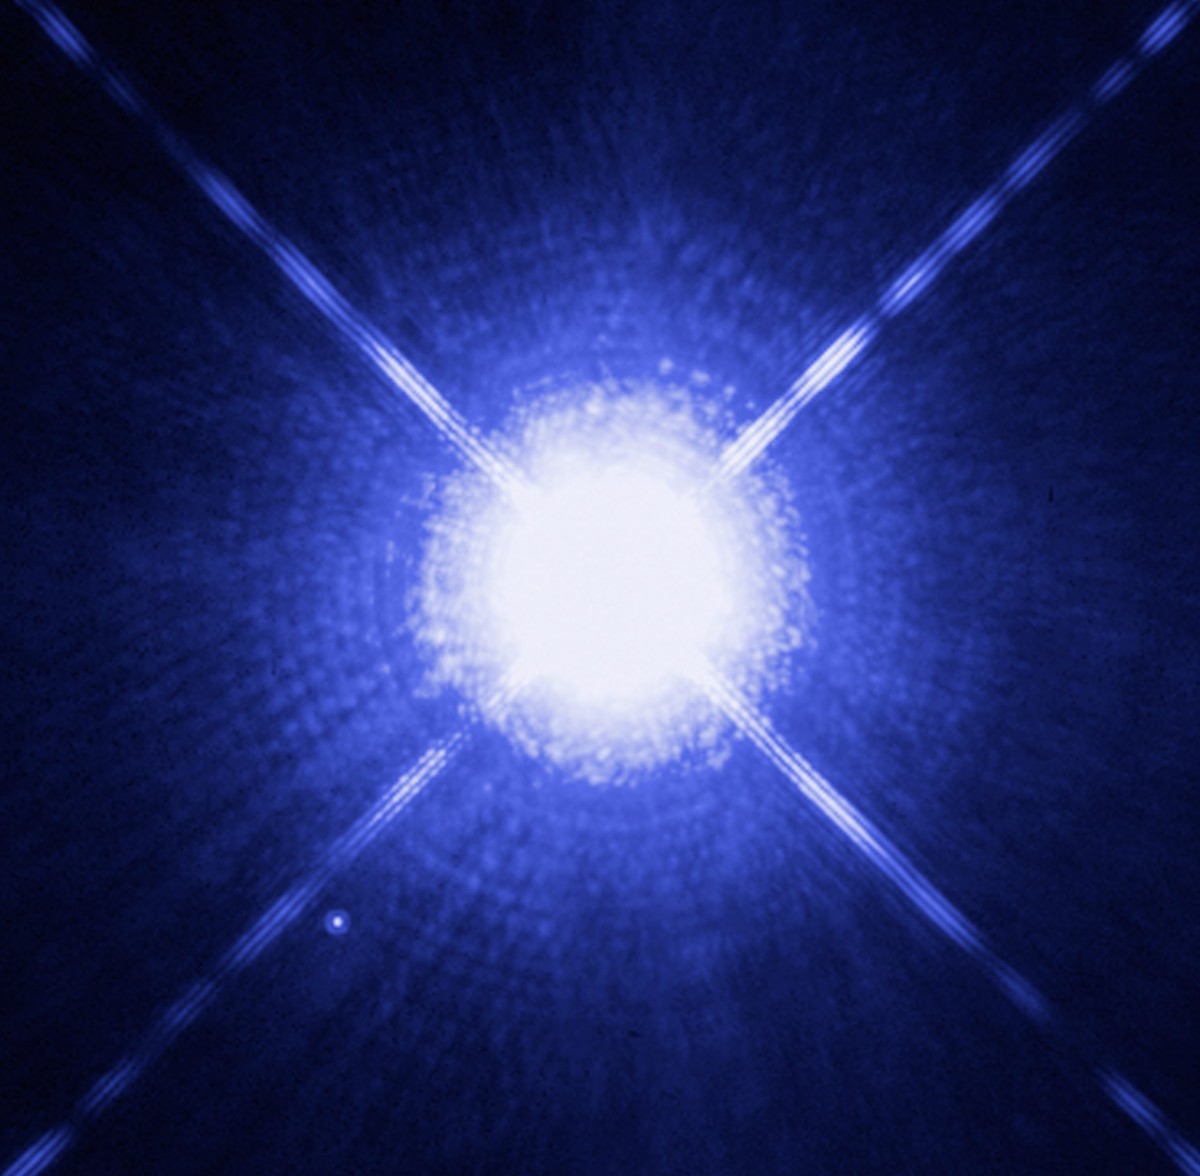 Can you see Sirius A's tiny white dwarf companion, Sirius B? (lower left)